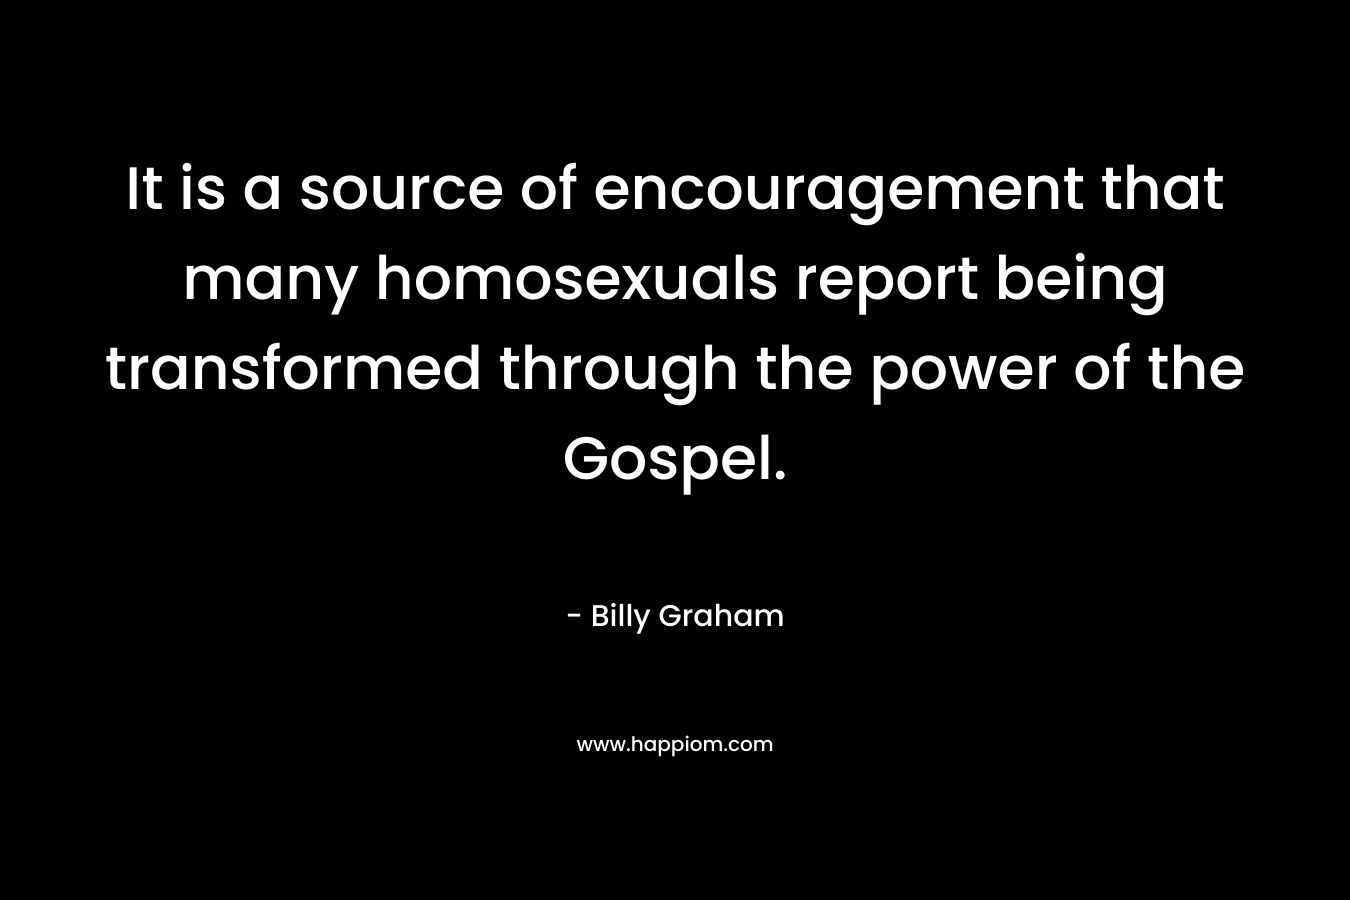 It is a source of encouragement that many homosexuals report being transformed through the power of the Gospel. – Billy Graham